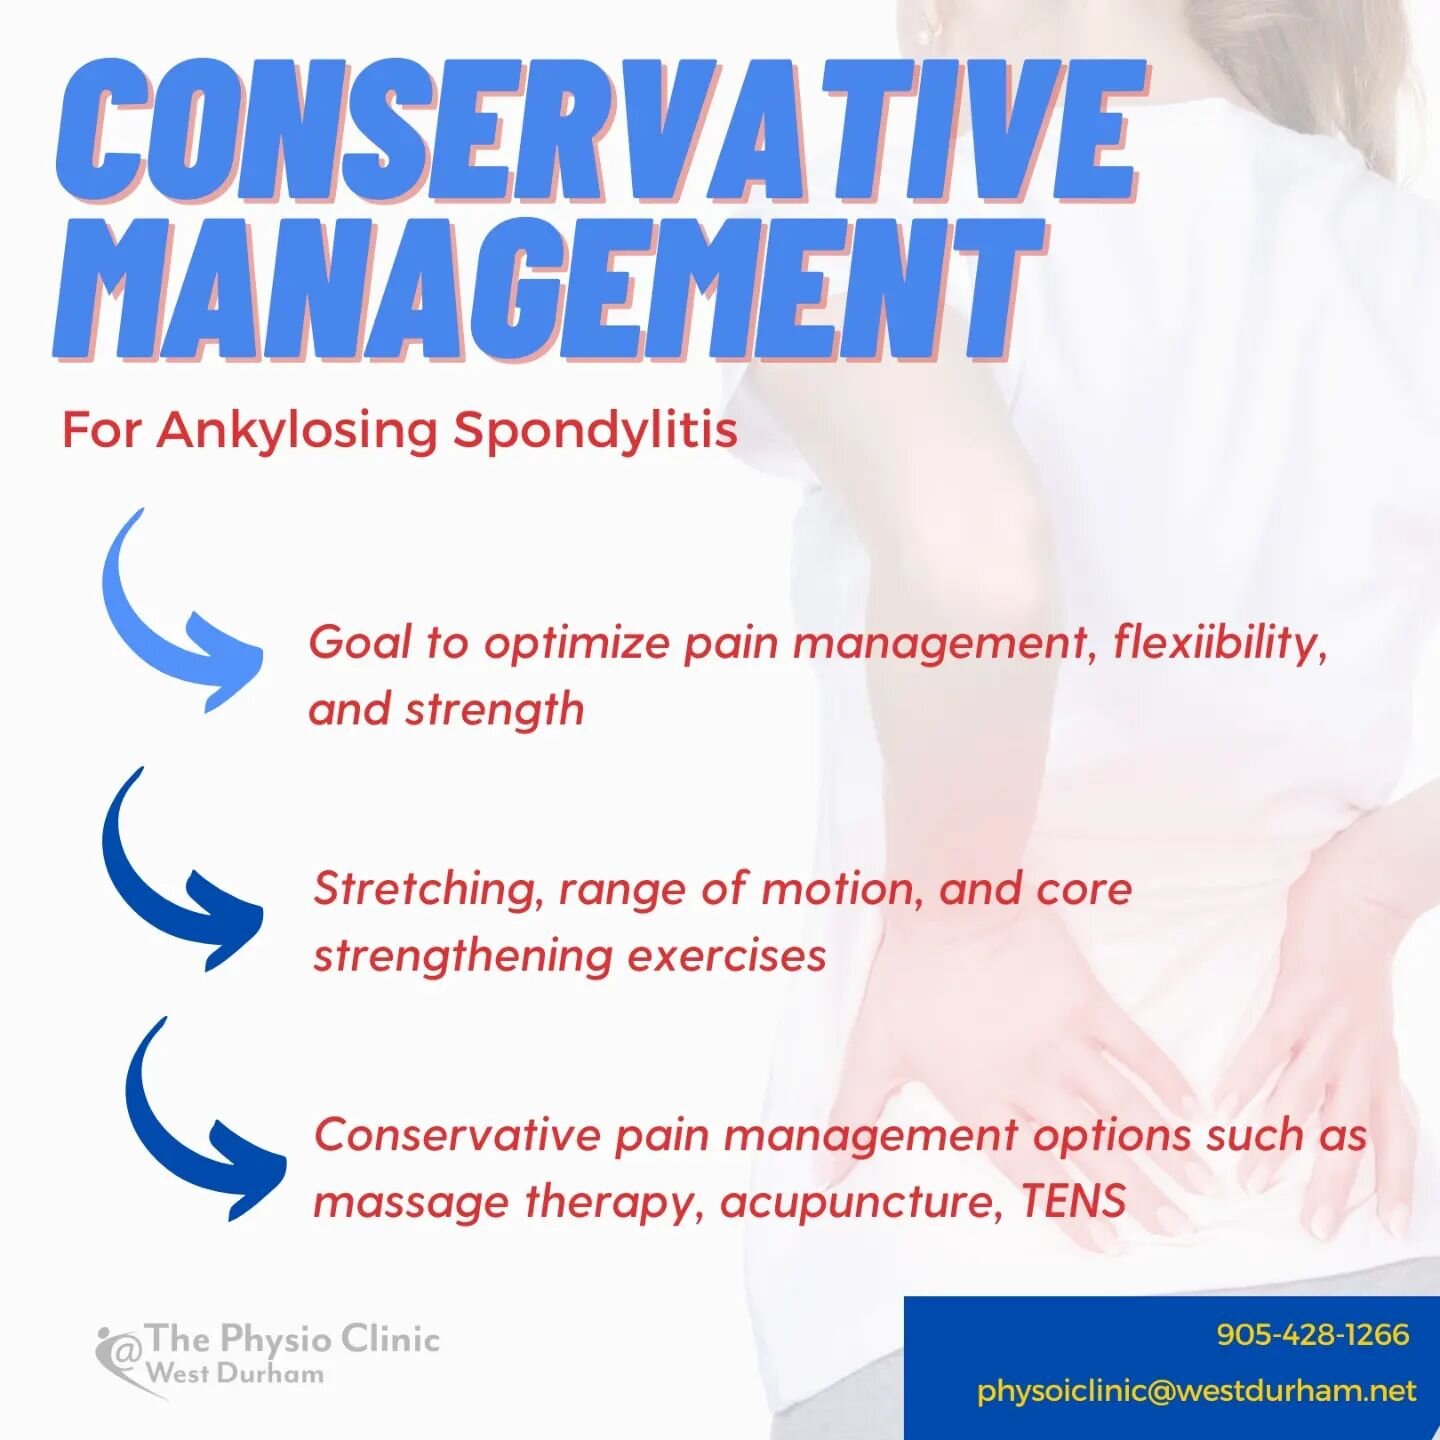 As a follow-up to our most recent &quot;Friday Facts&quot; post, take a look at these conservative measures one can take for Ankylosing Spondylitis!

Contact us today to book a consultation and learn more about our services!
👇
905.428.1266
physiocli